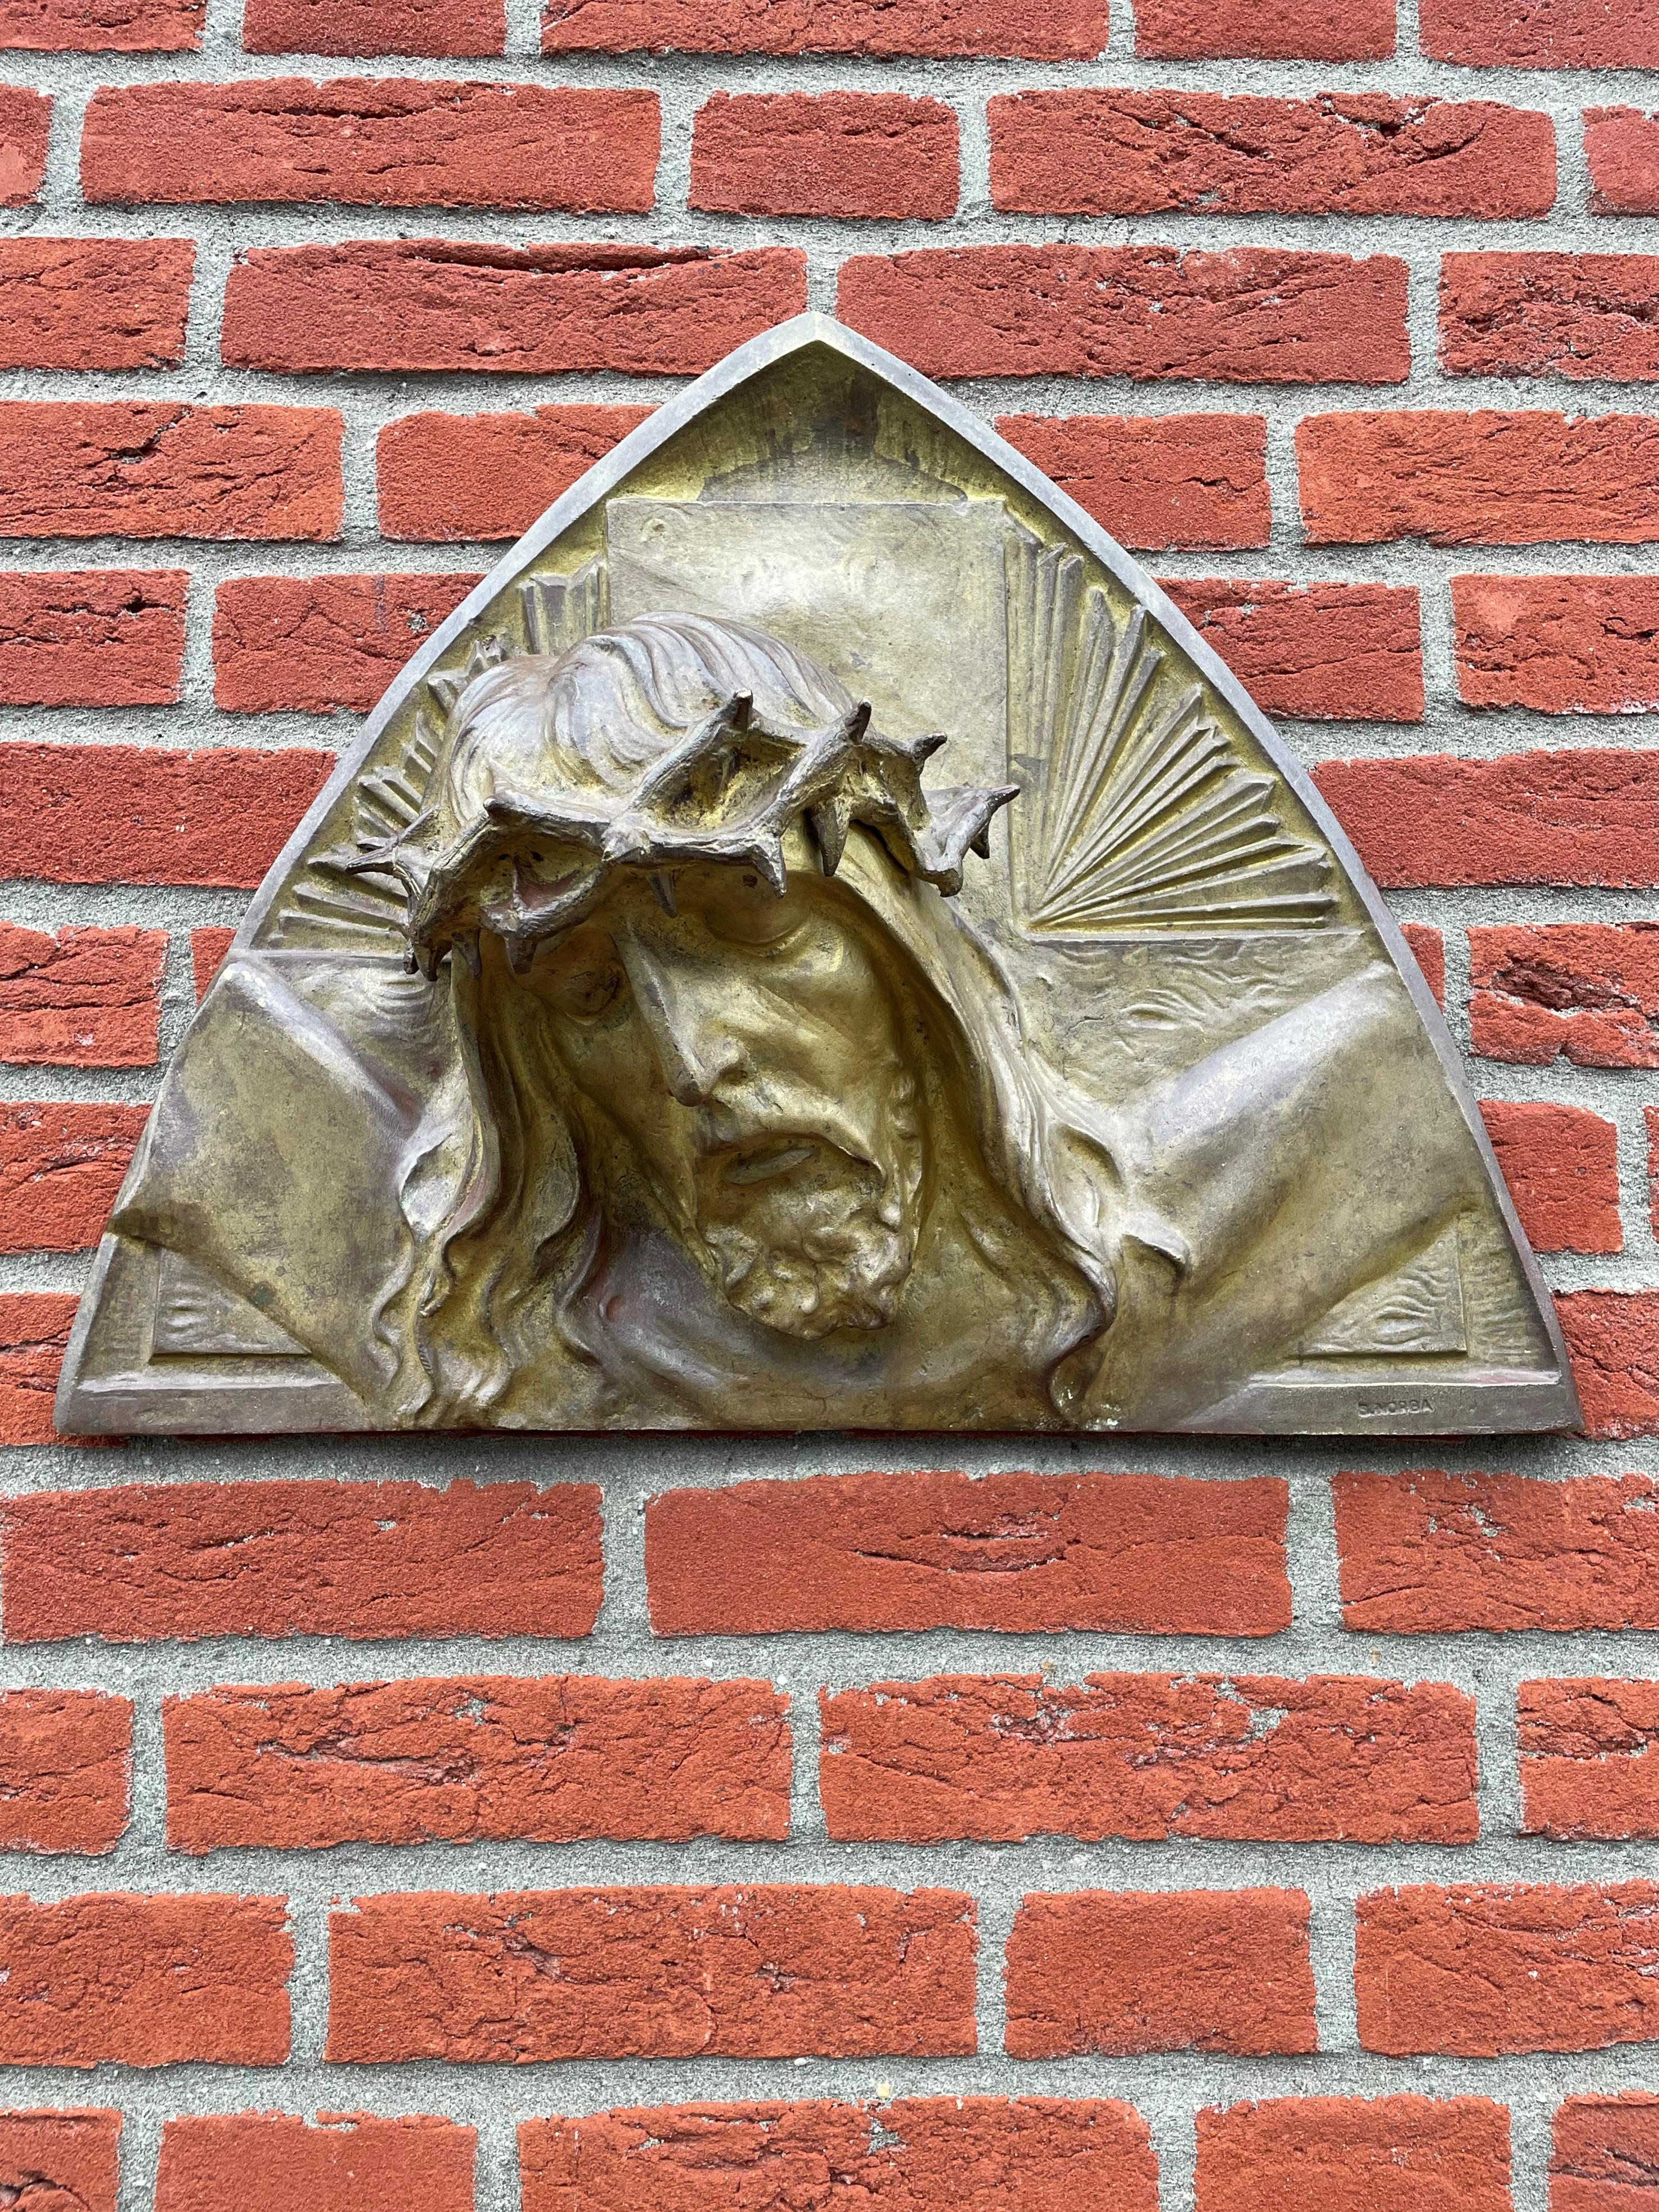 Impressive and sizeable sculpture of Christ with a gruesome crown of thorns.

This striking sculpture of Christ on a rounded triangle wall plaque dates from the 1920s. This bronze actually is the deepest in relief by Sylvain Norga that we have